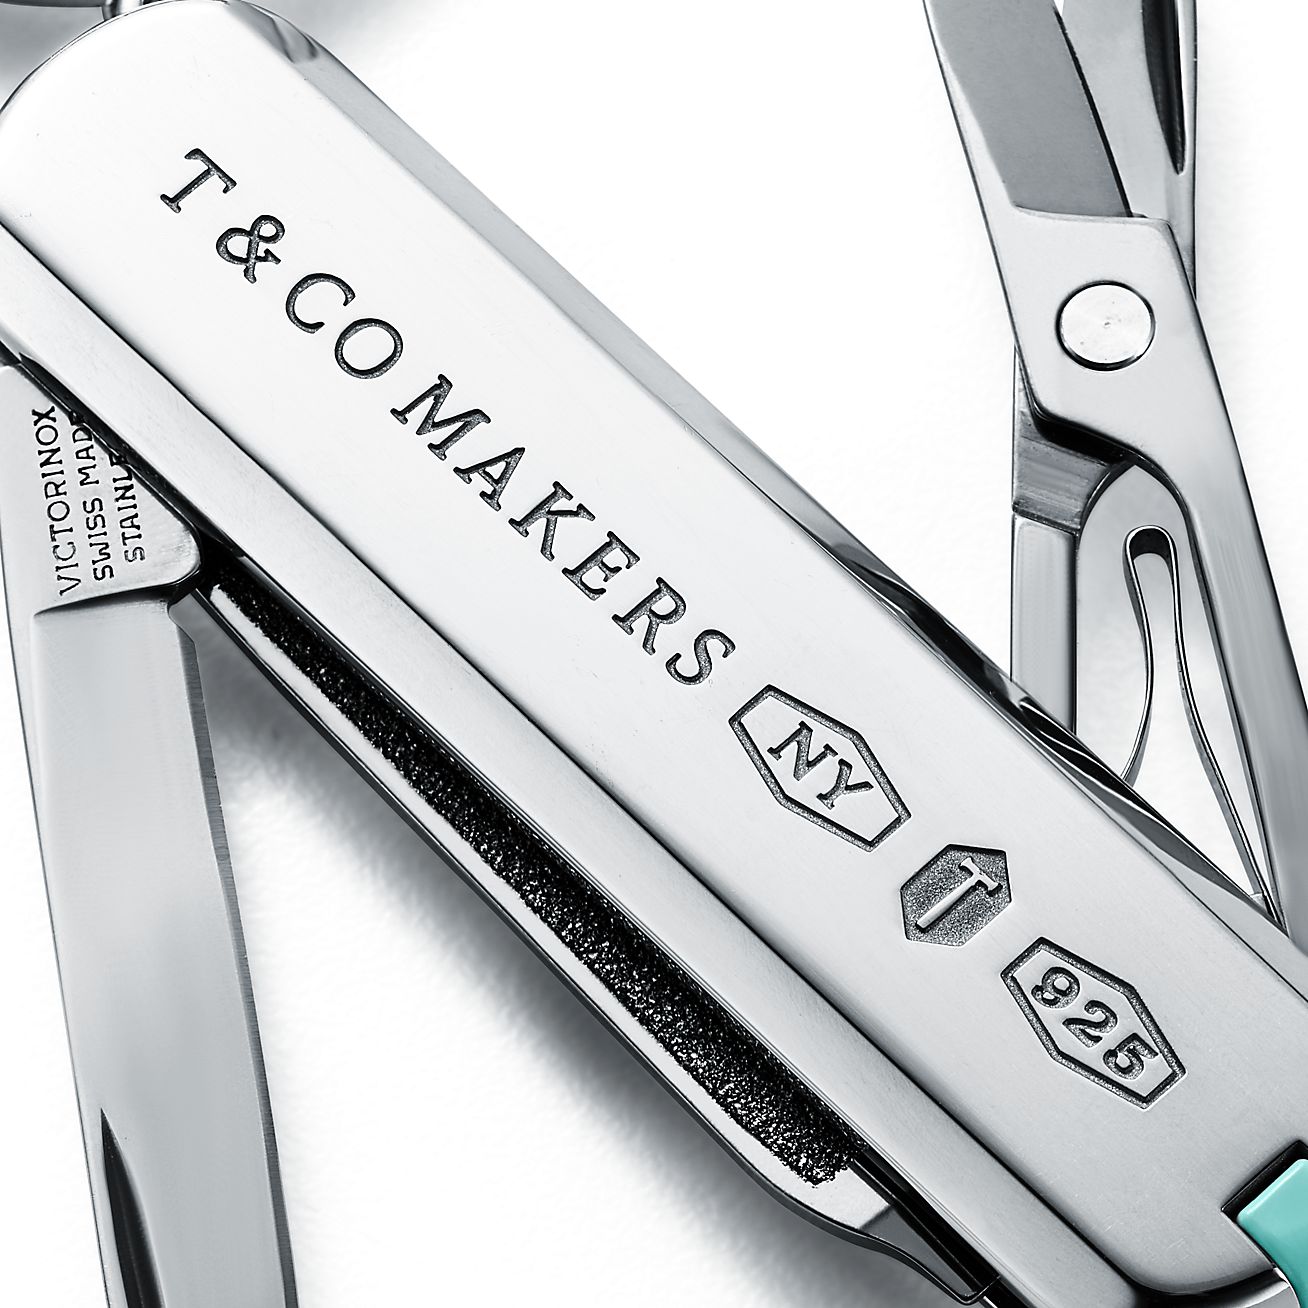 Tiffany 1837 Makers swiss army knife in 